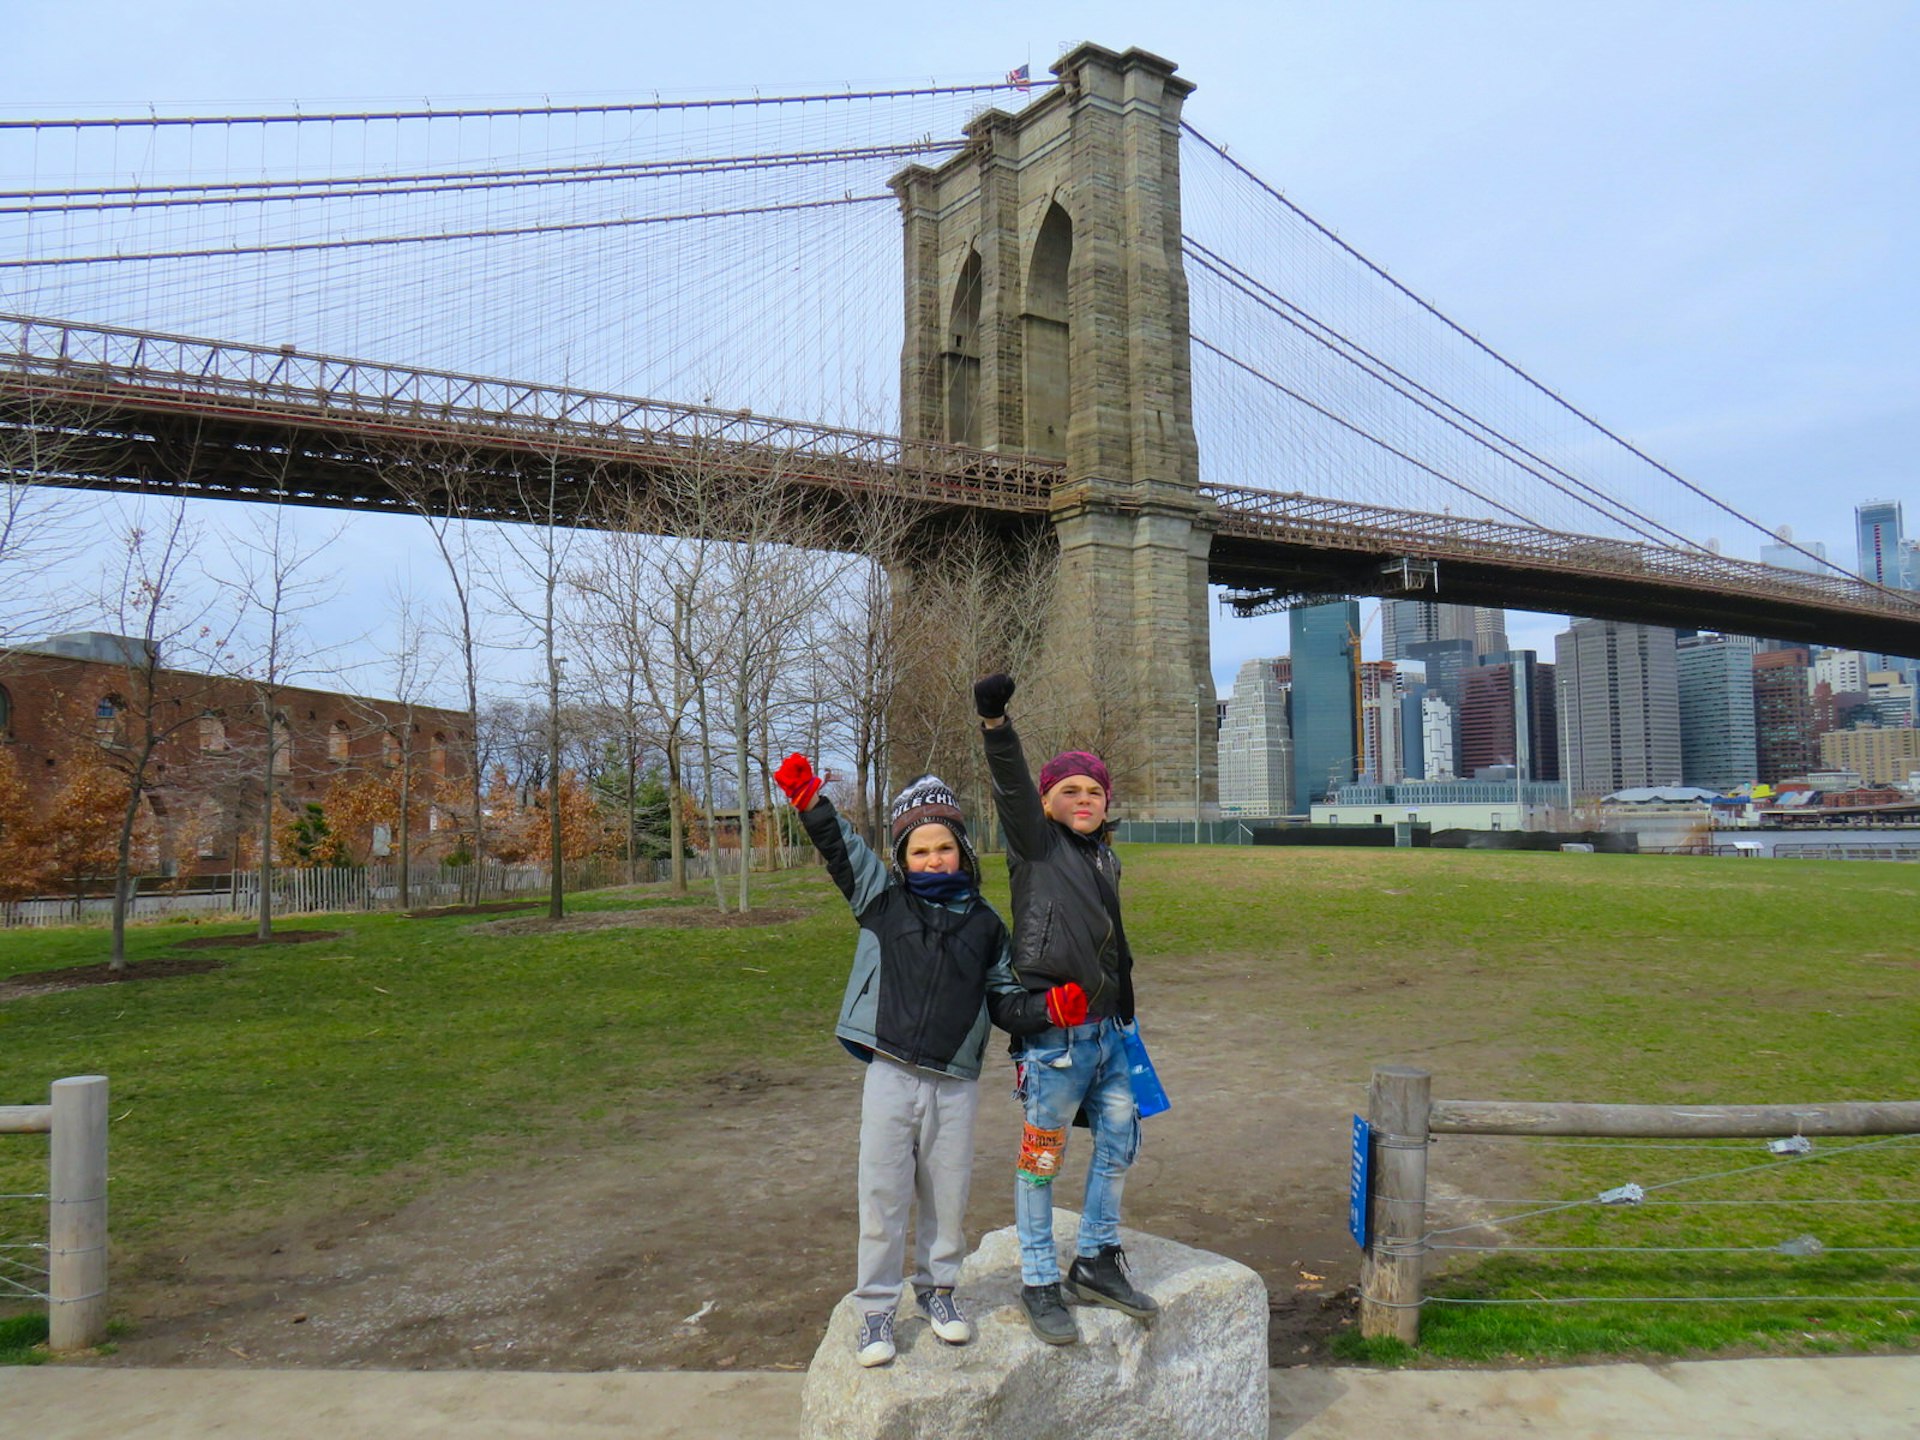 Rohan and Kai showcase their superhero moves in front of the Brooklyn Bridge © Ethan Gelber / Lonely Planet